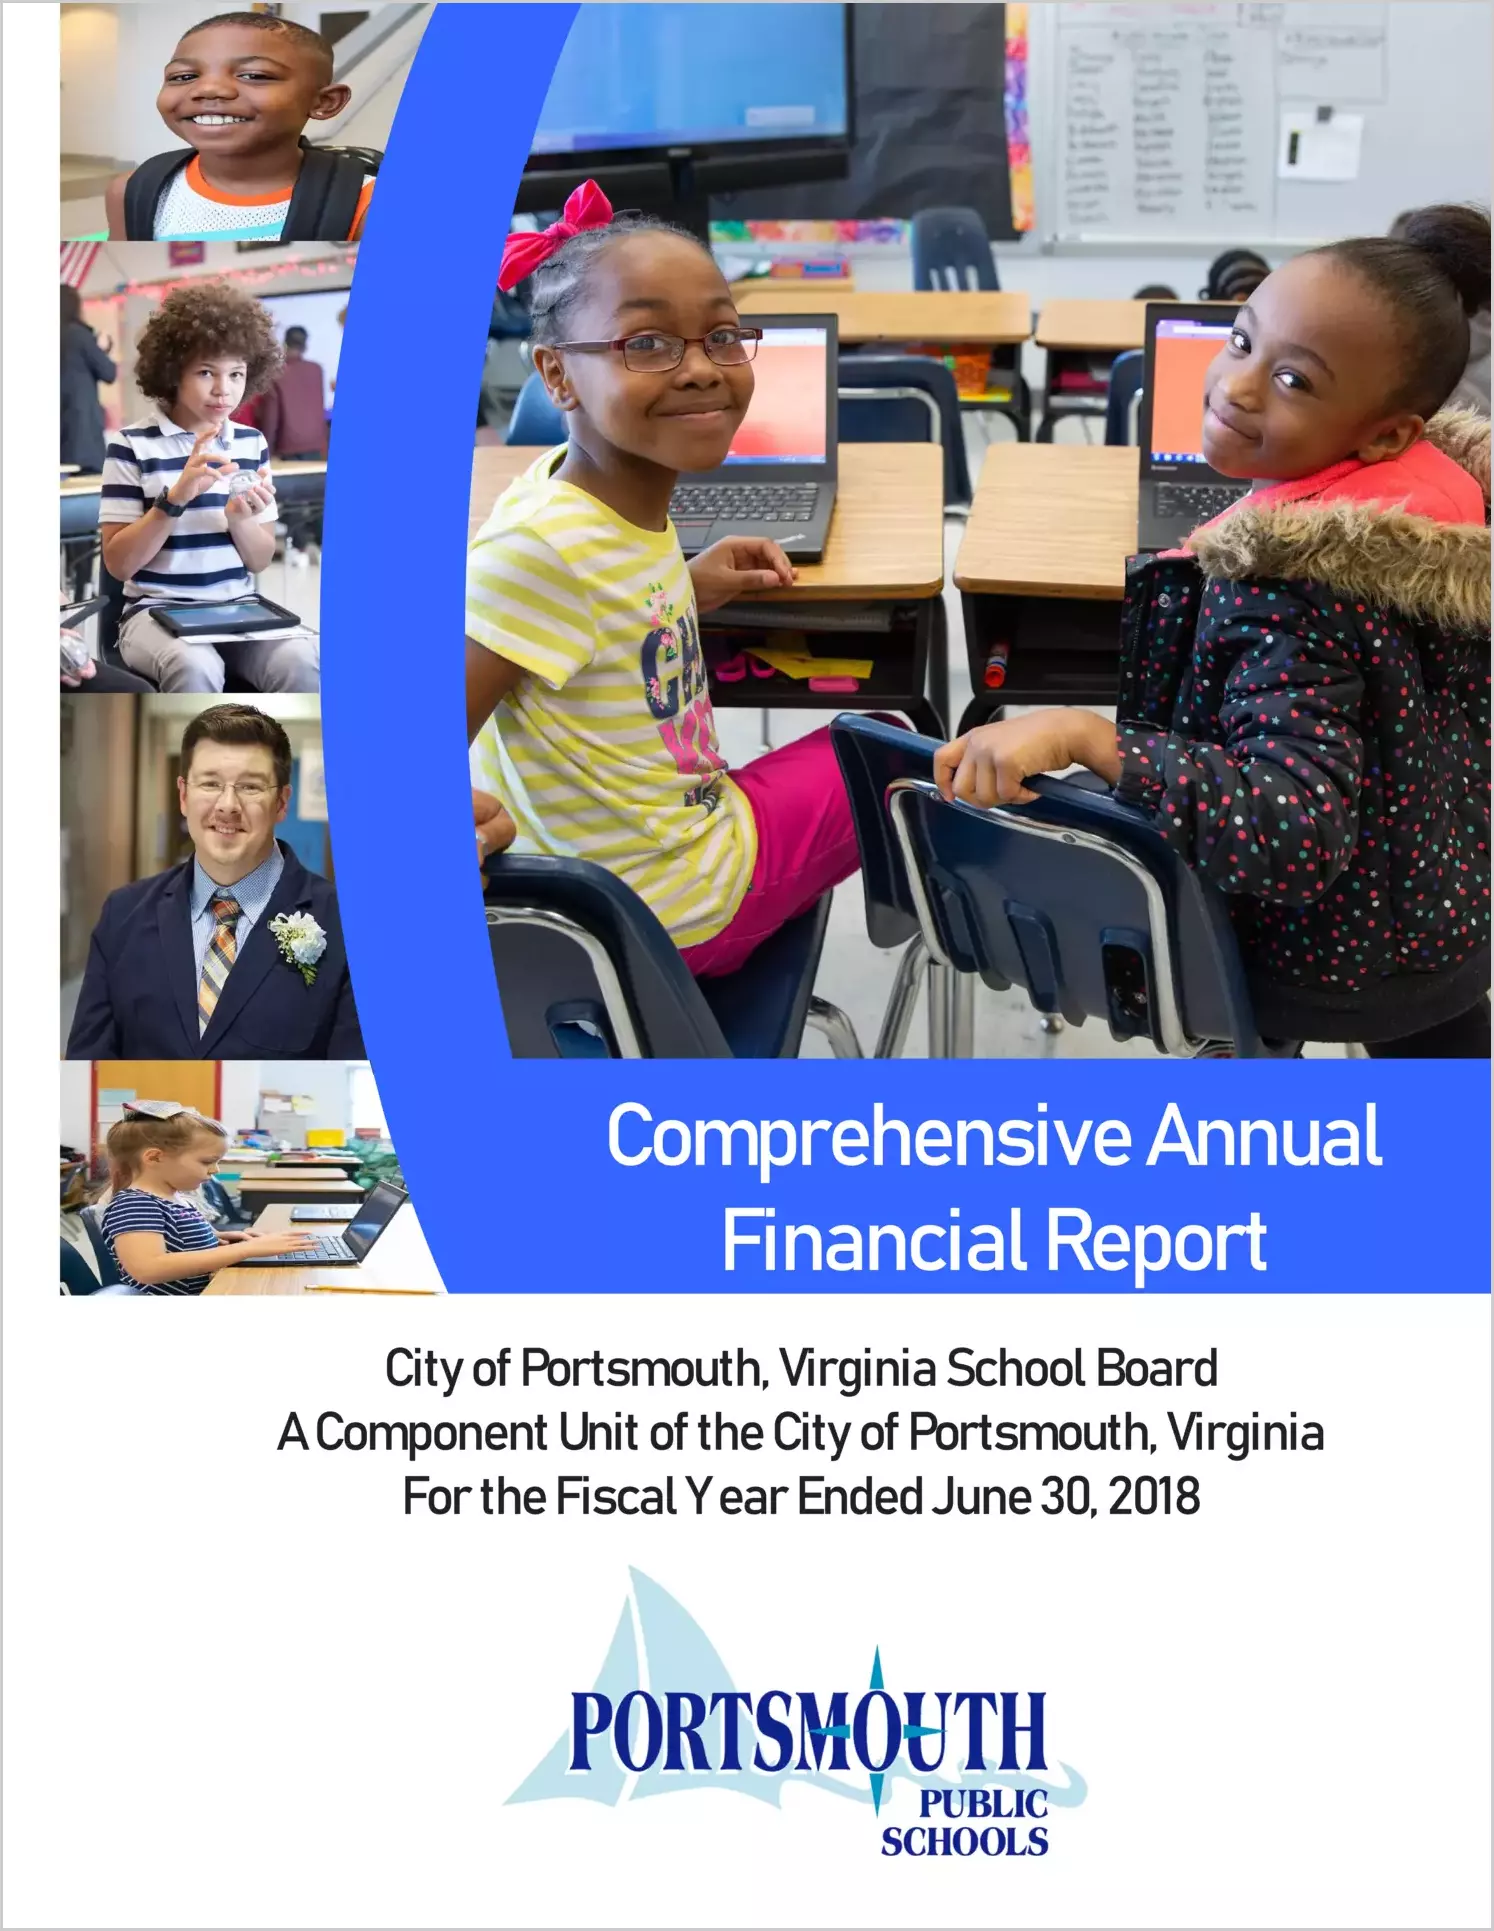 2018 Public Schools Annual Financial Report for City of Portsmouth